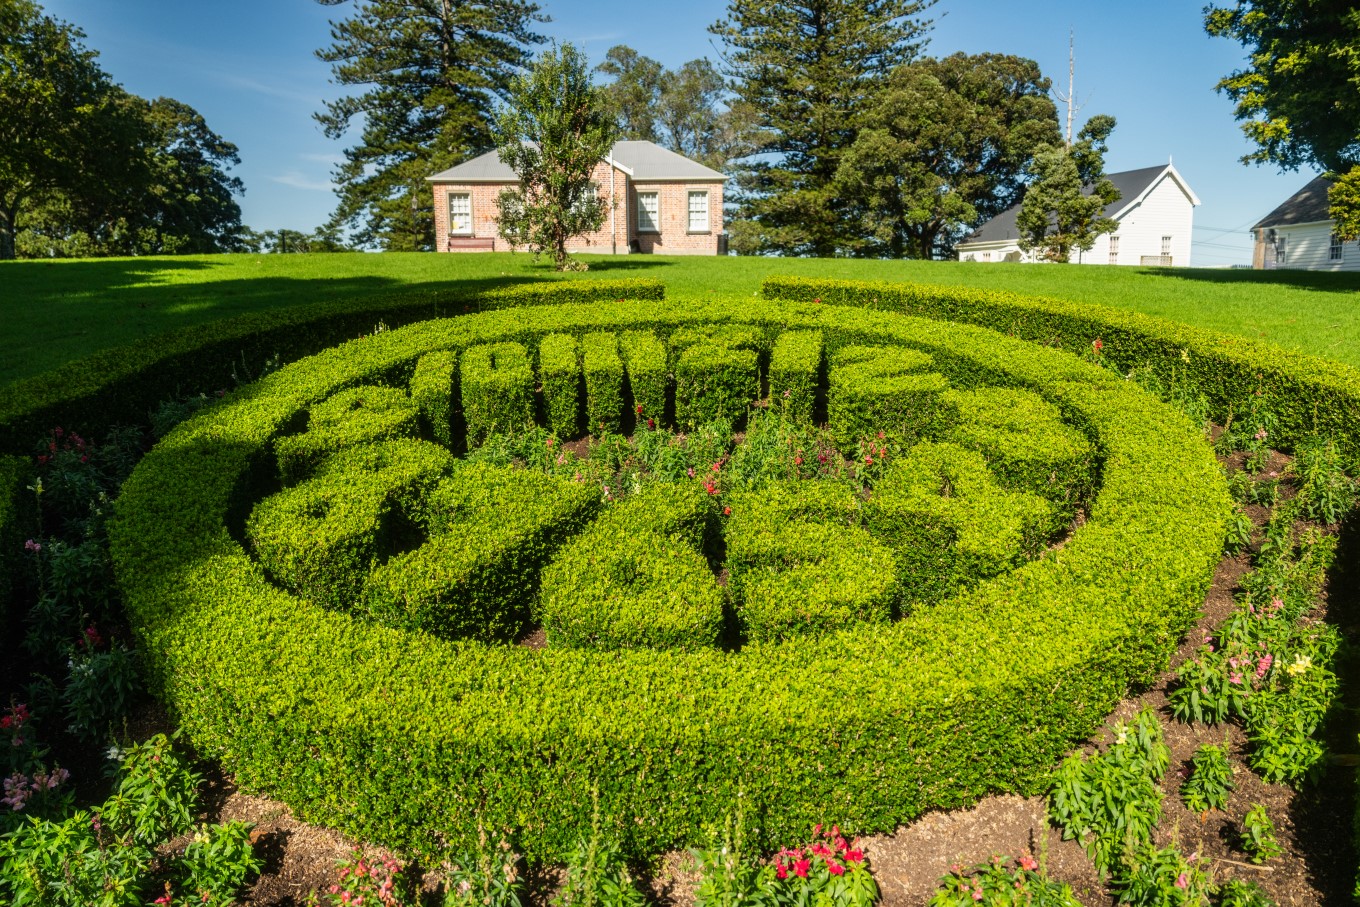 The Onehunga Blockhouse, Laishley House and Fencible cottage Journey’s End in Jellicoe Park – seen here behind the flower clock – are open to the public on the first and third Sunday of each month.